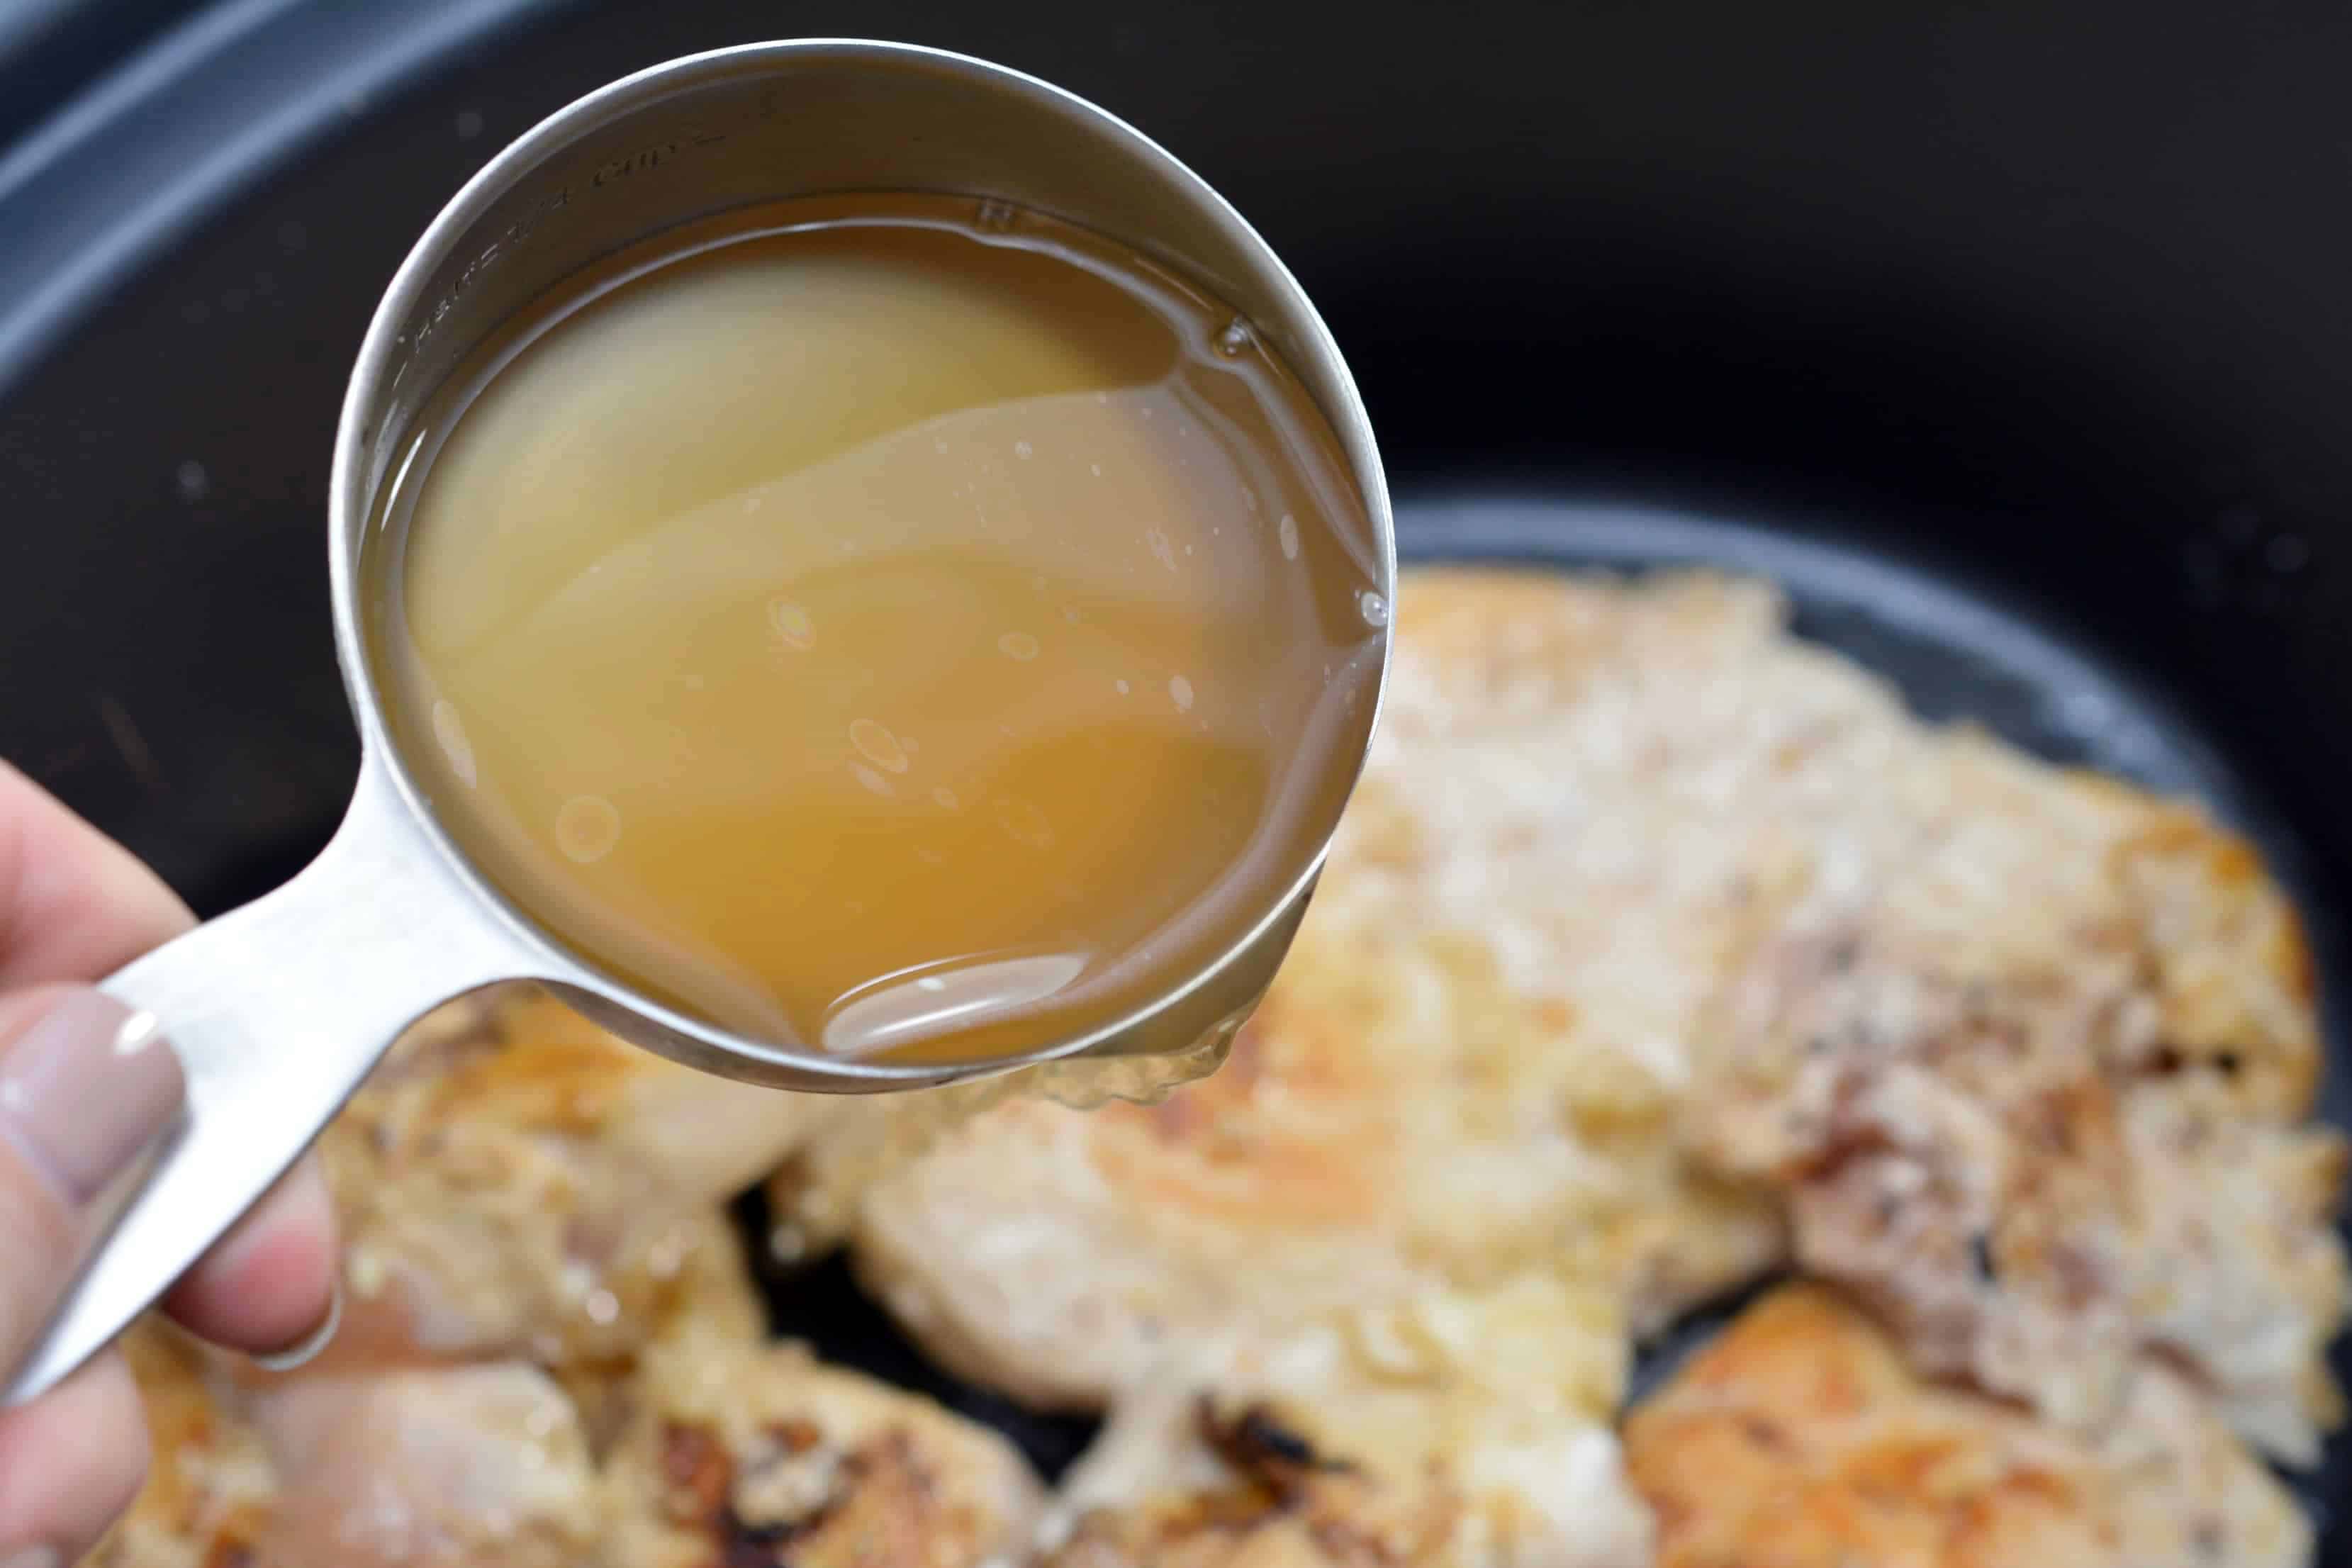 Pour chicken broth over the chicken